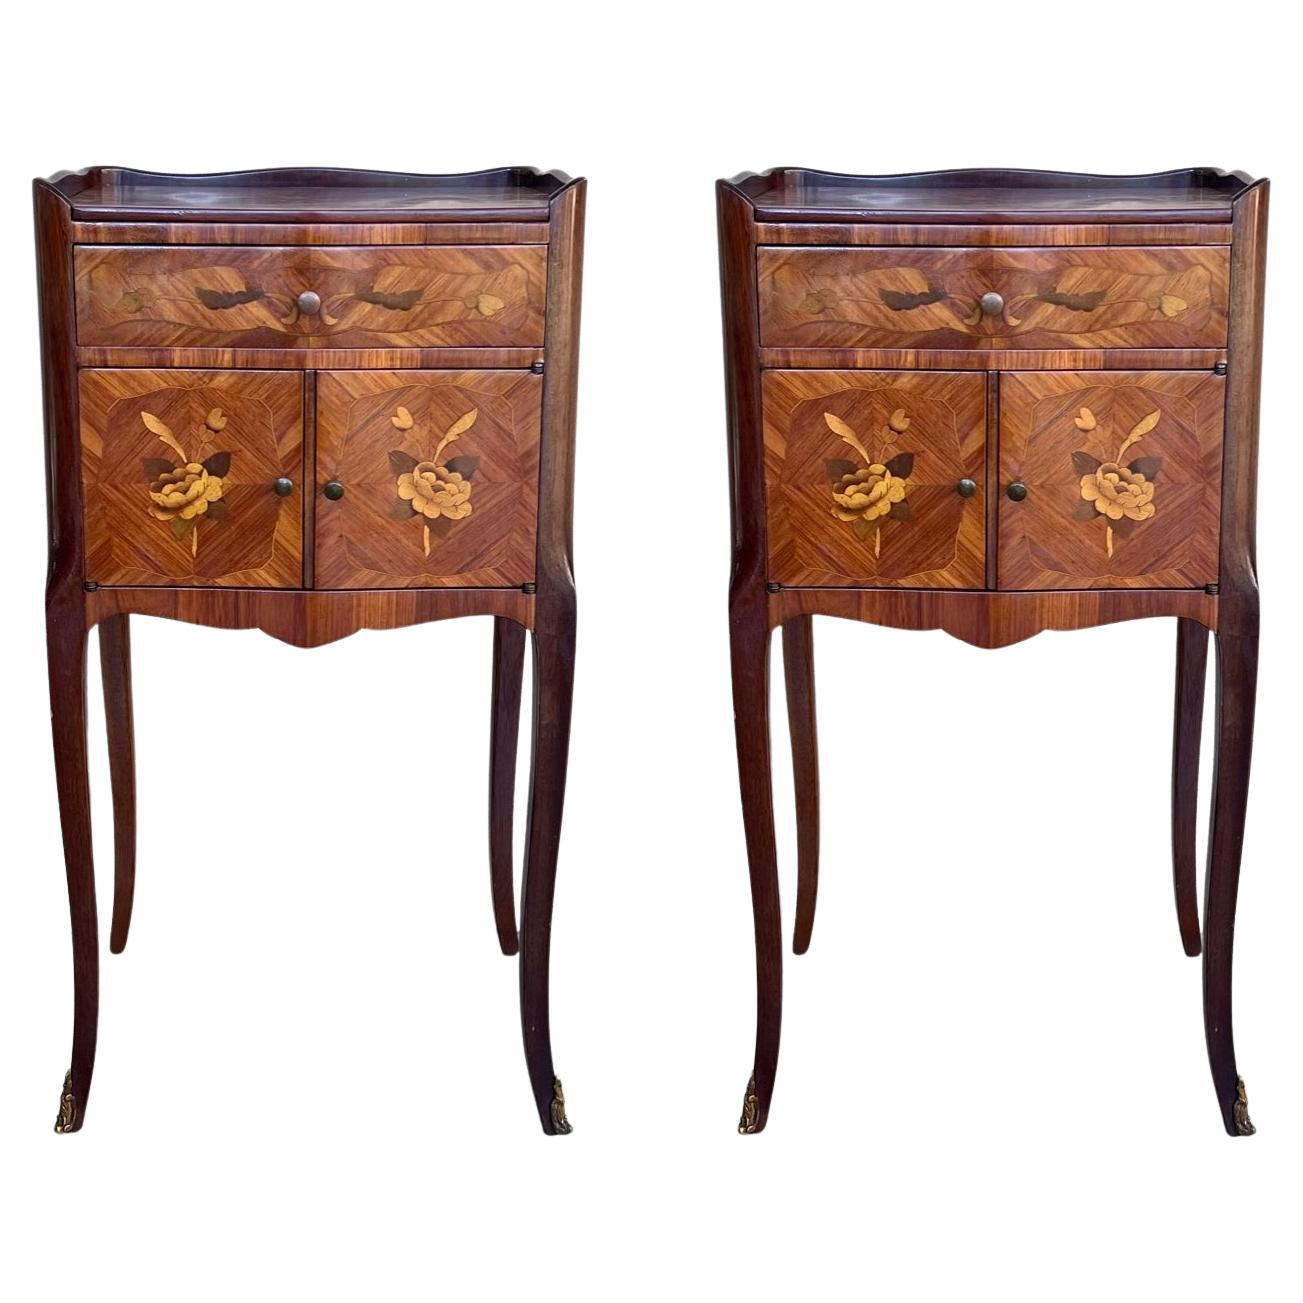 Early 20th Century French Bedside Tables or Nightstands in Marquetry and Bronze